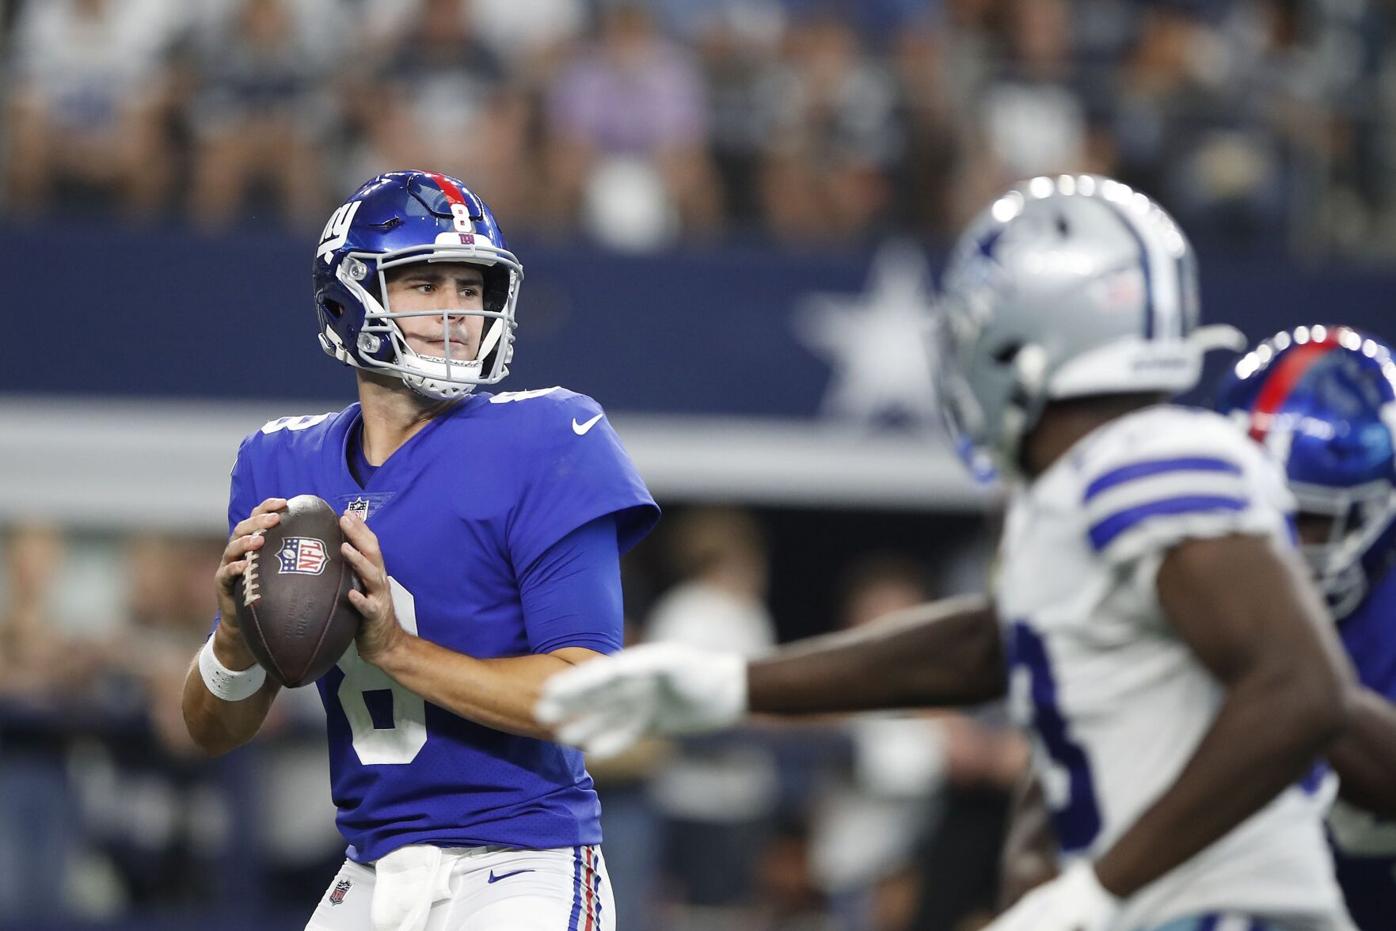 Giants QB Daniel Jones loved Panthers growing up in Charlotte